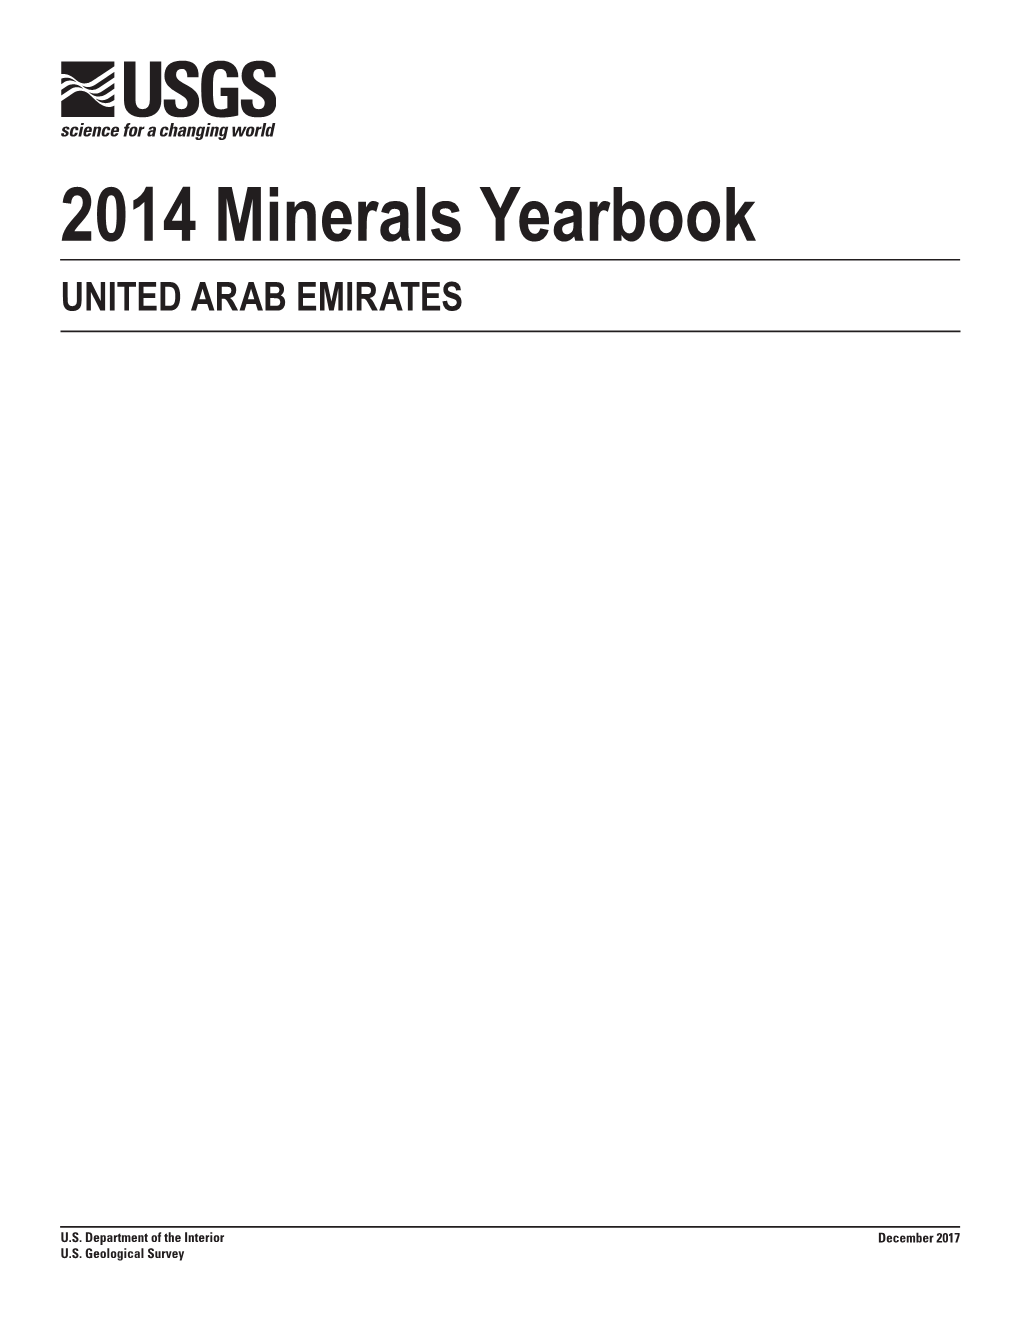 The Mineral Industry of the United Arab Emirates in 2014